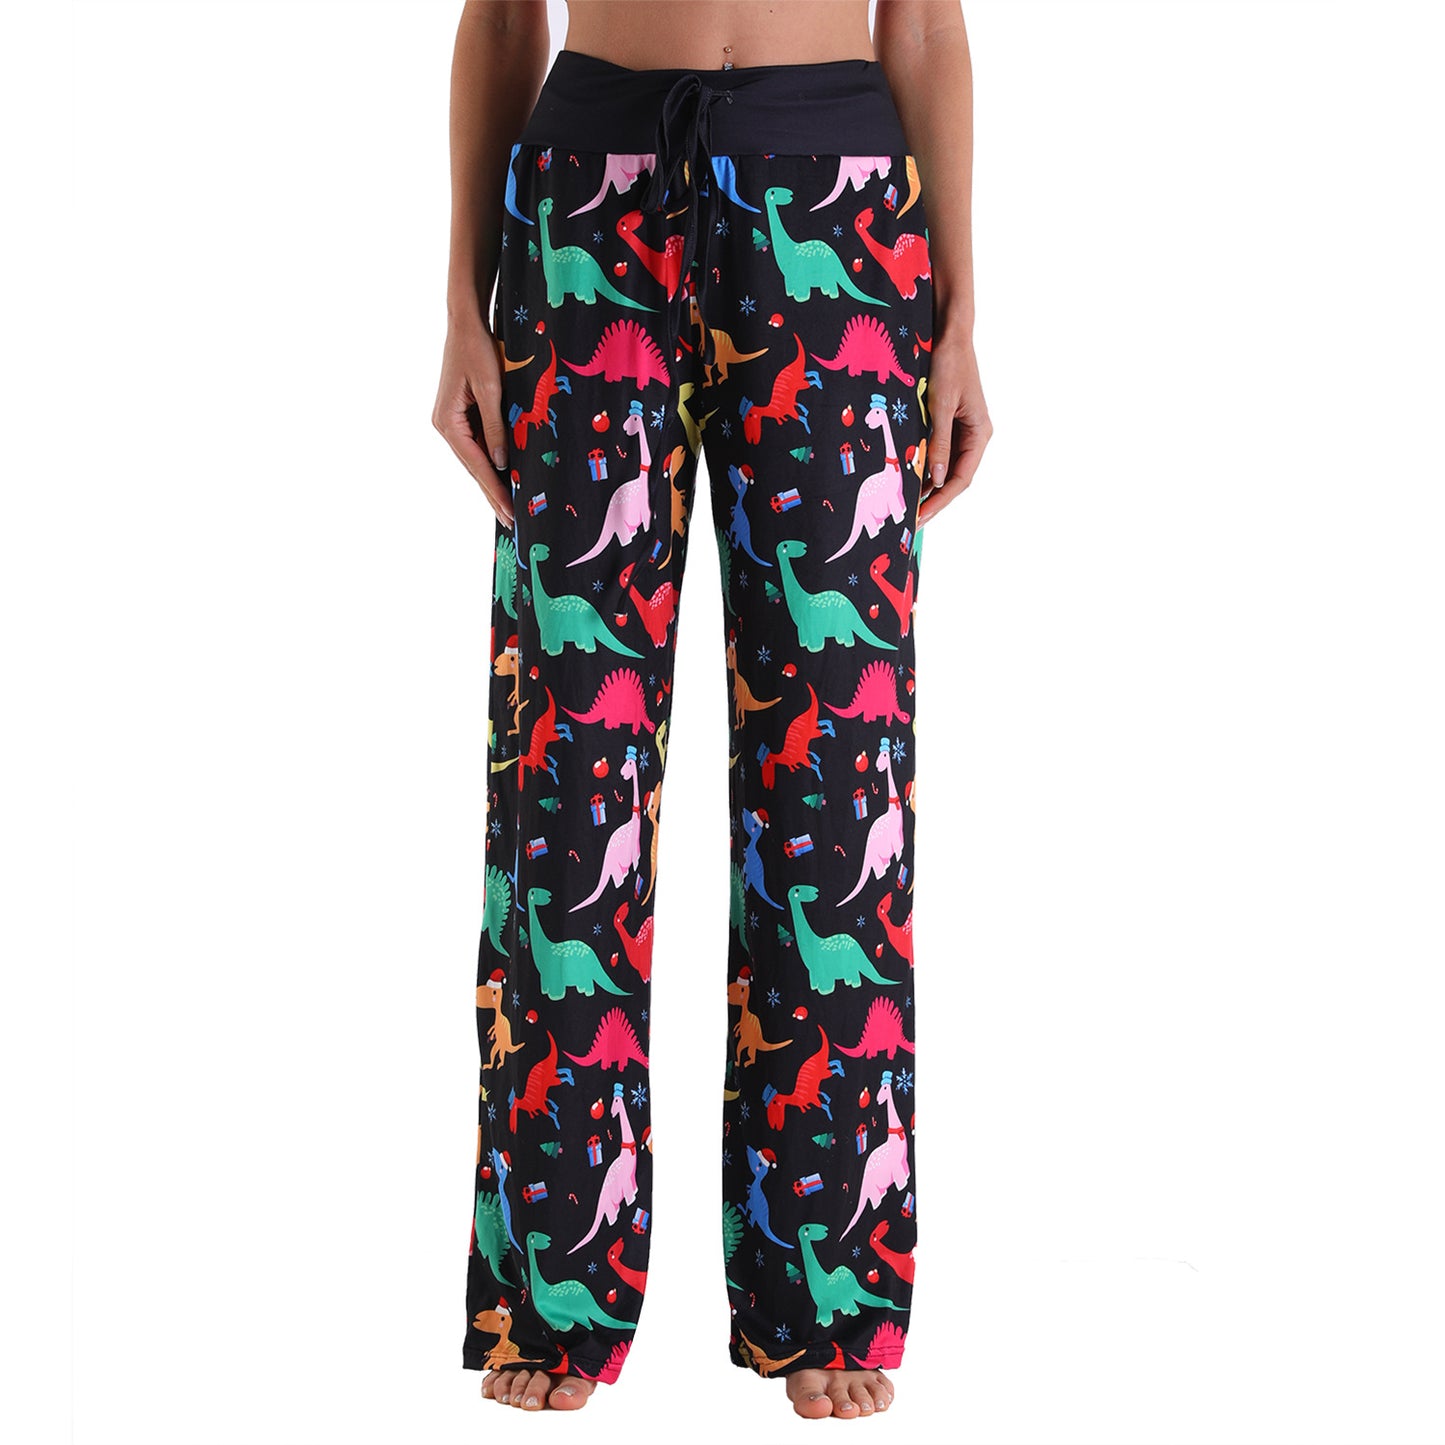 Casual Floral Print Women High Waist Trousers-Pajamas-2012-S-Free Shipping at meselling99